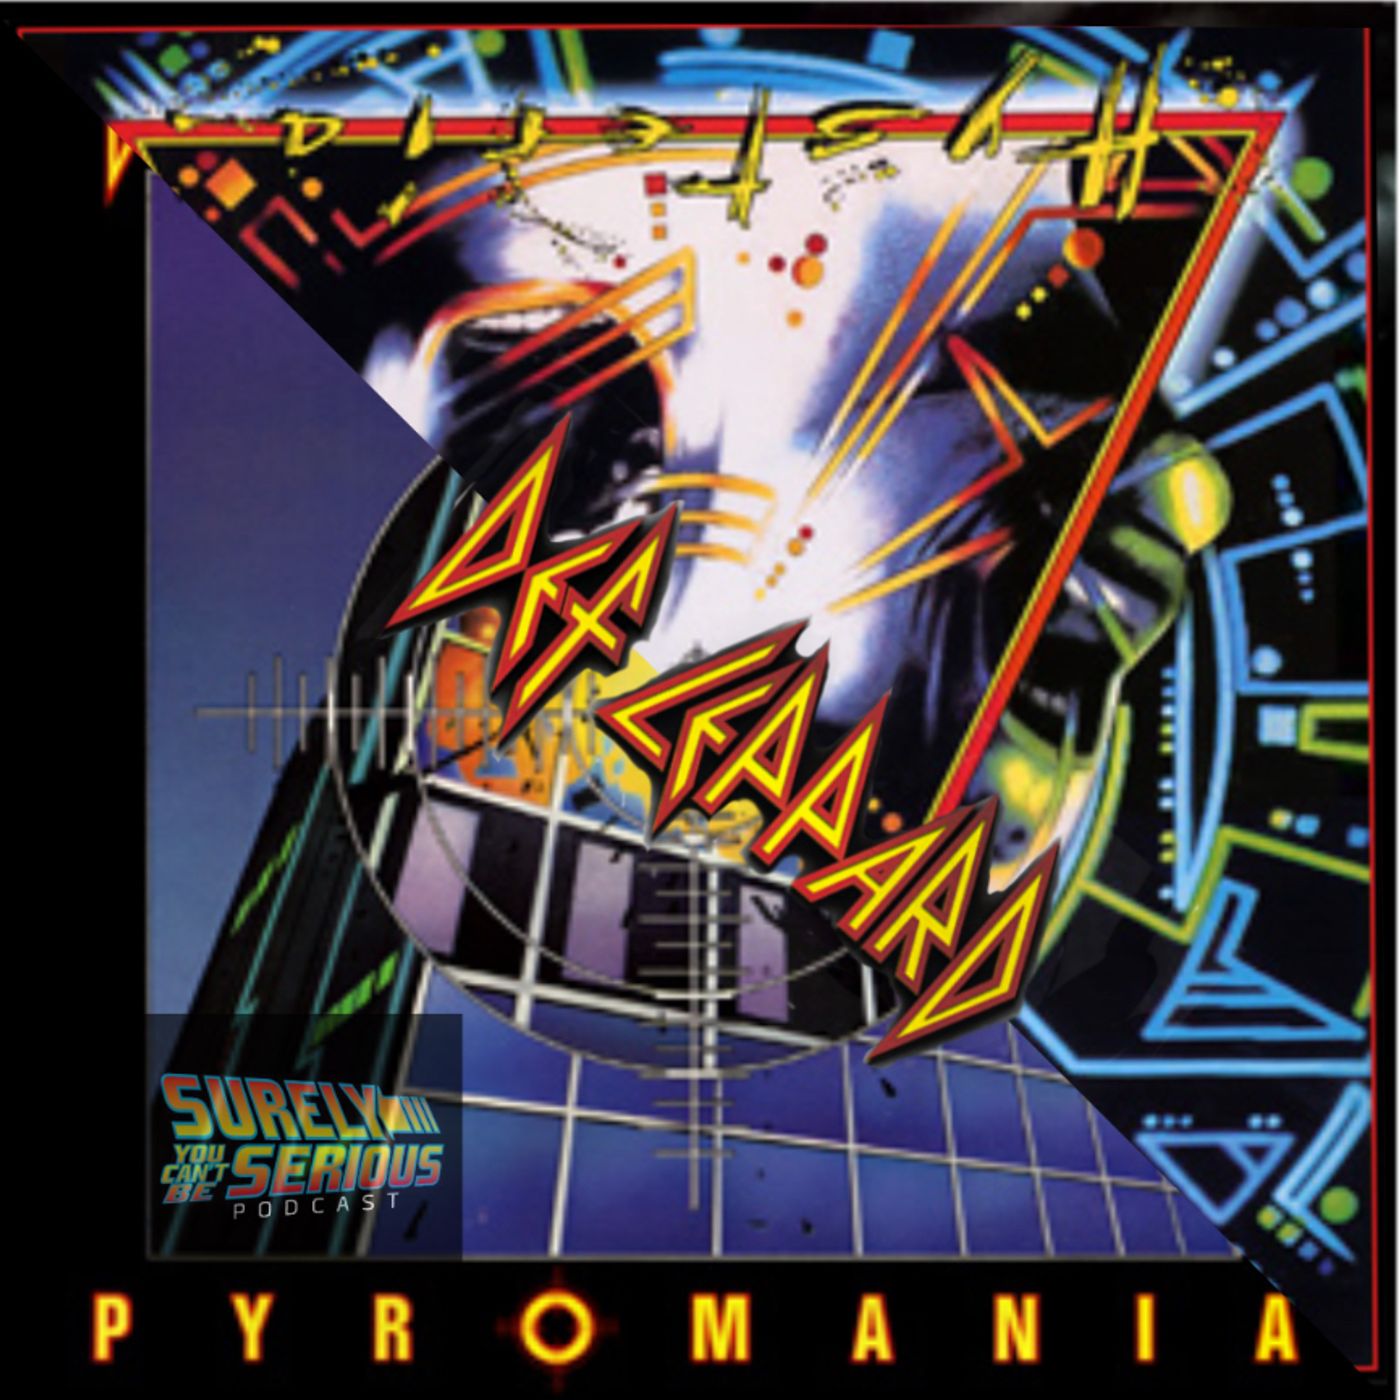 Pyromania vs Hysteria - Which Def Leppard Album is the Best? Image